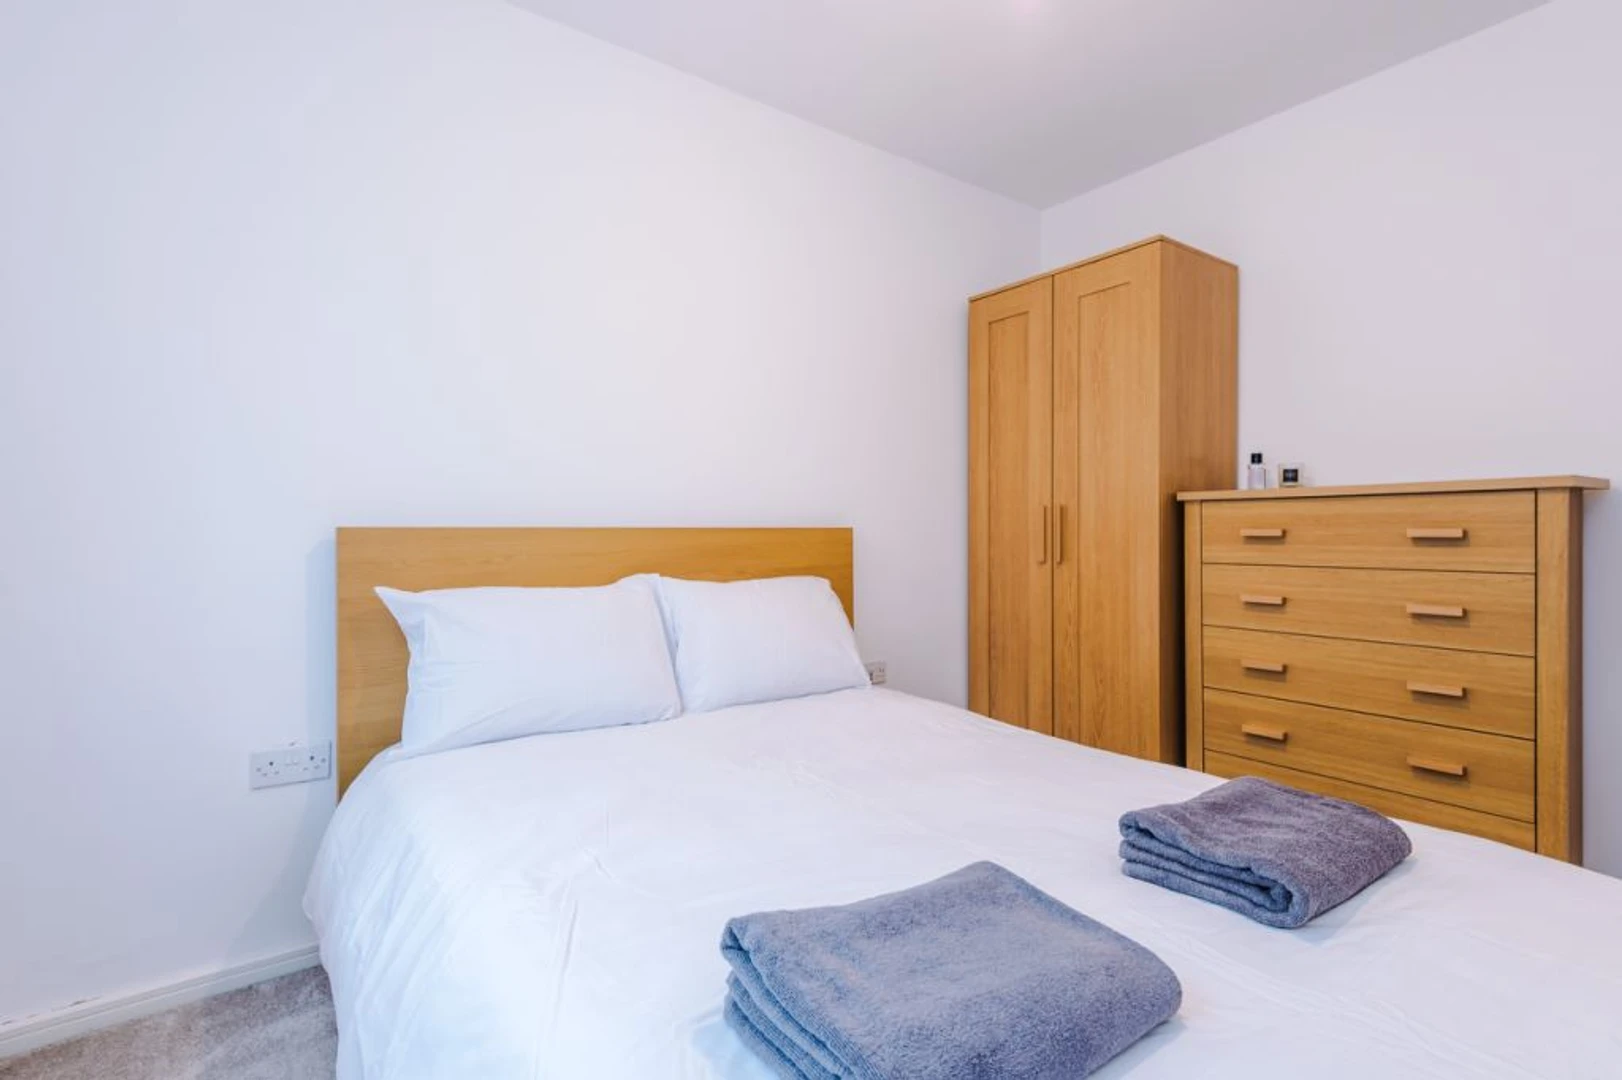 Accommodation in the centre of Salford